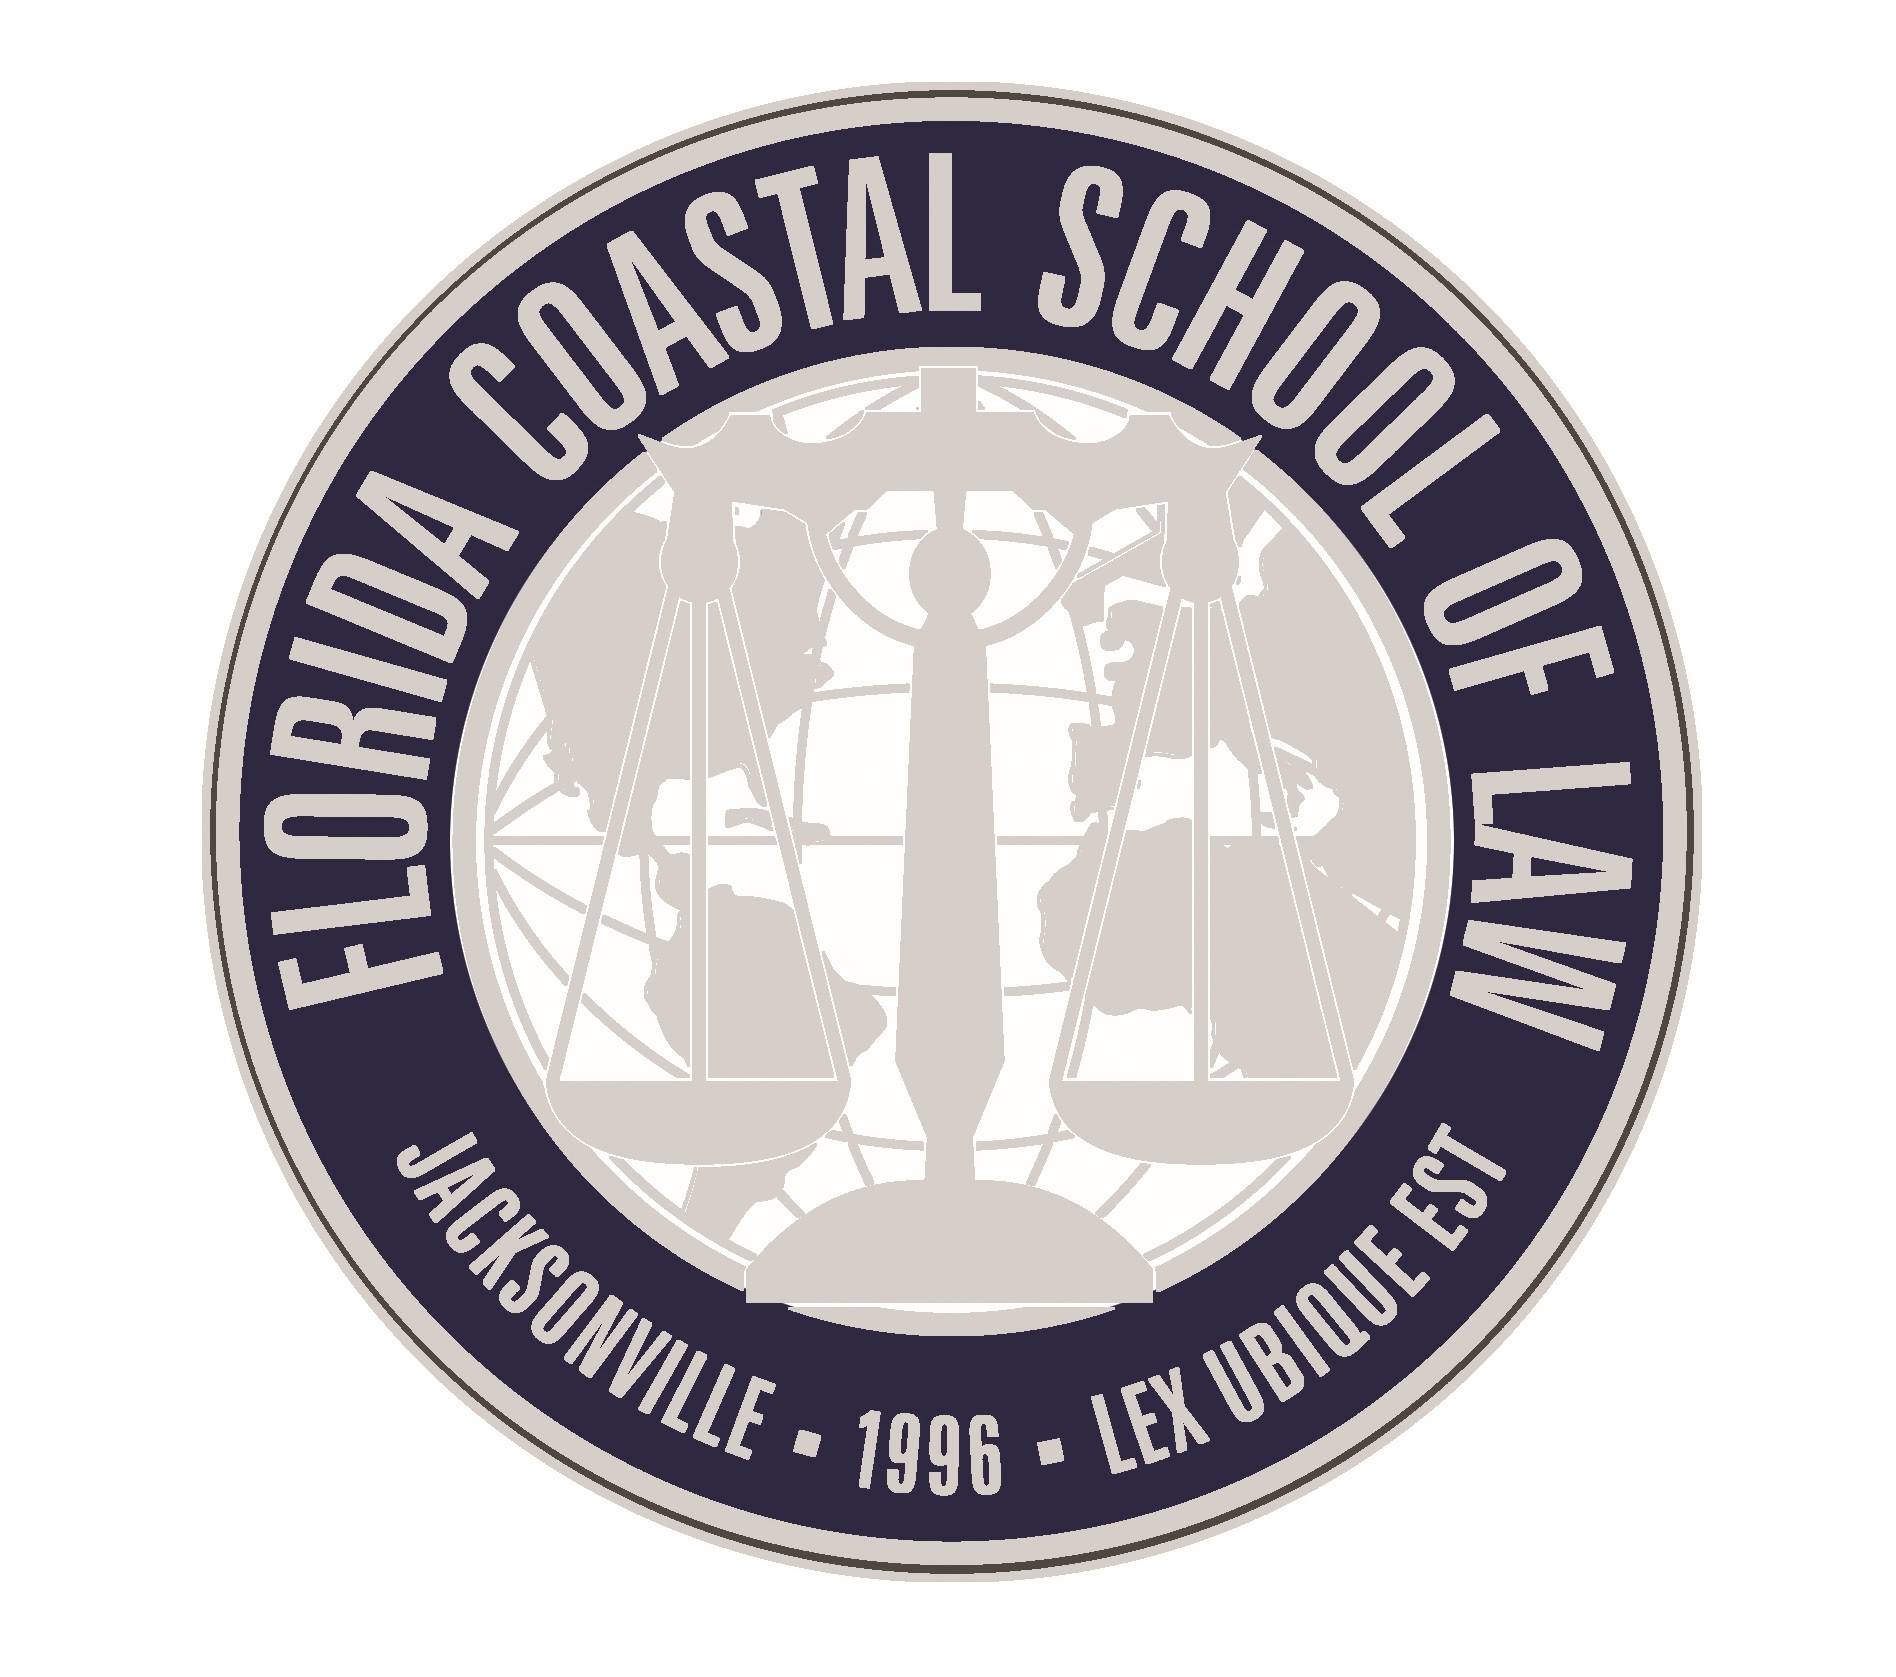 Florida Coastal School of Law - Immigrant and Human Rights FREE Clinic